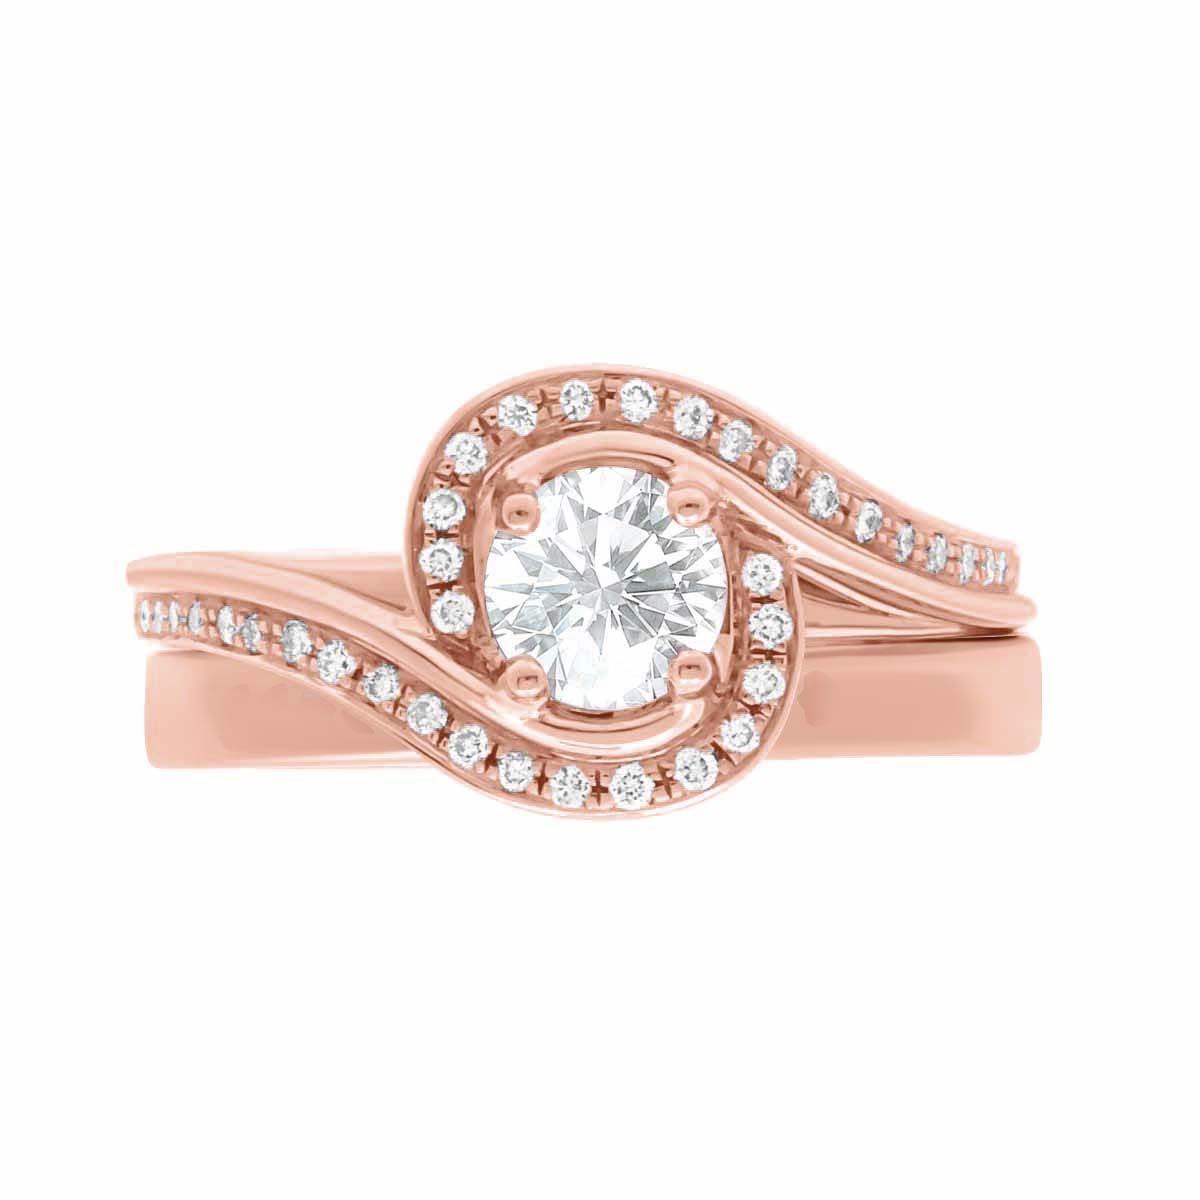 Contemporary Style Engagement Ring in  rose gold, with a matching plain wedding ring, lying flat, with a white background.